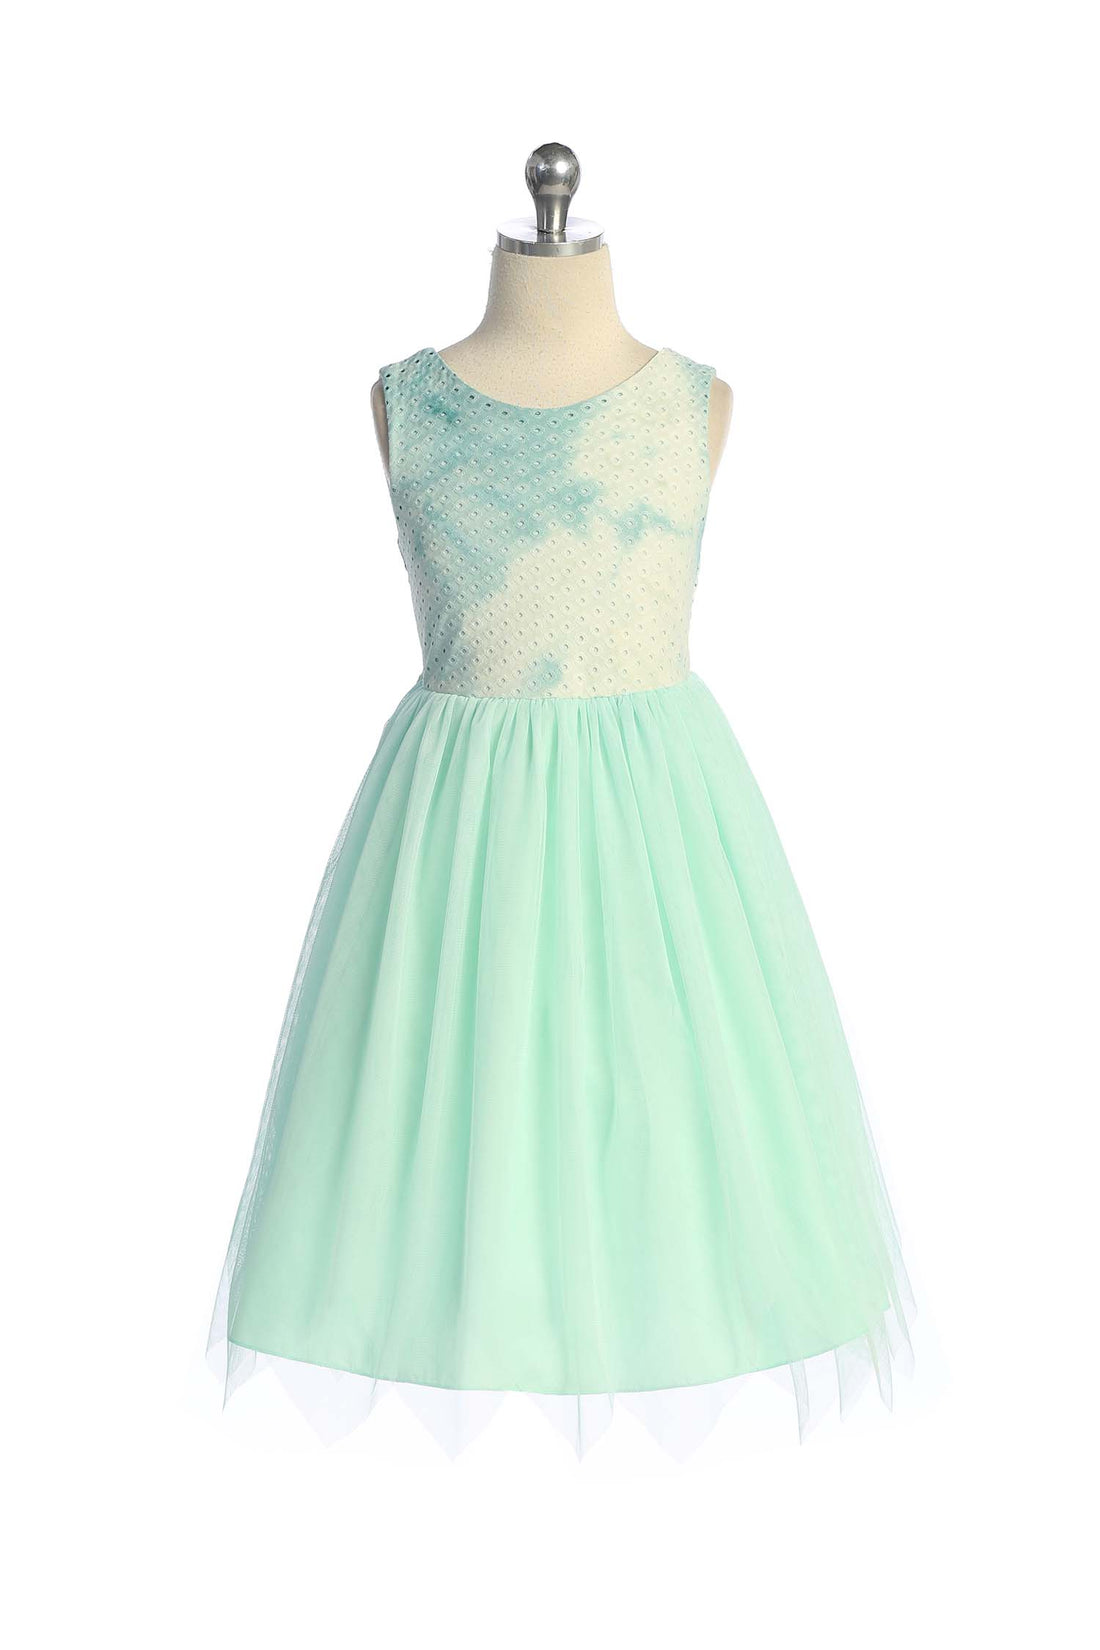 Girl Party Ombre Eyelet Stretch Mesh Dress by AS542 Kids Dream - Girl Formal Dresses